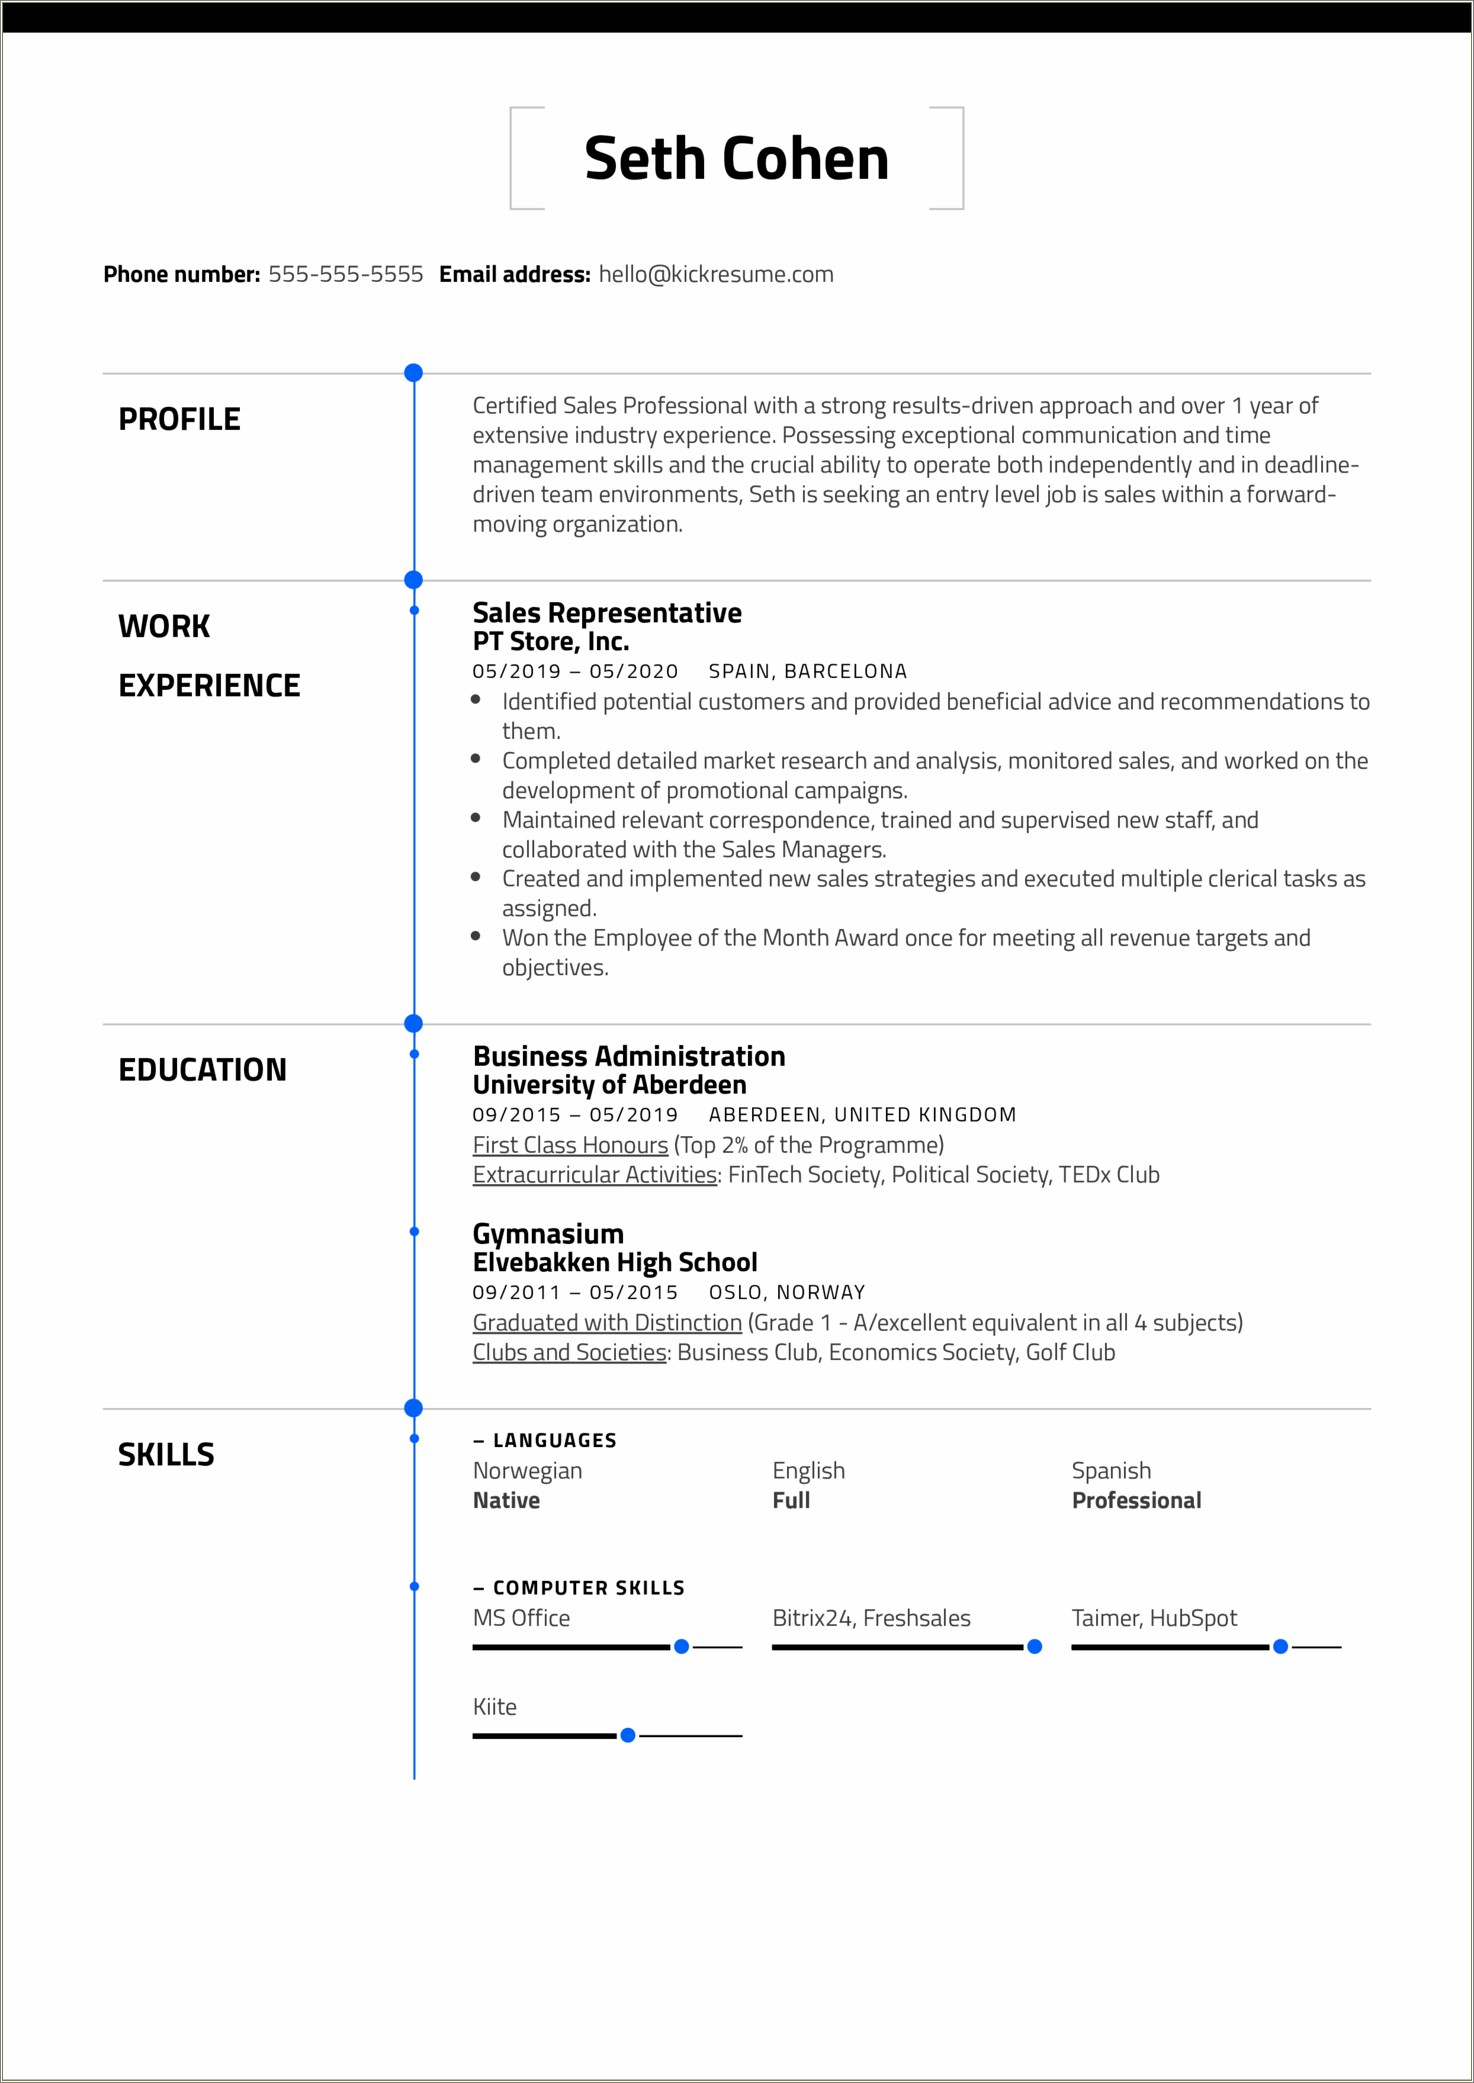 Free Resume Examples For High School Graduate